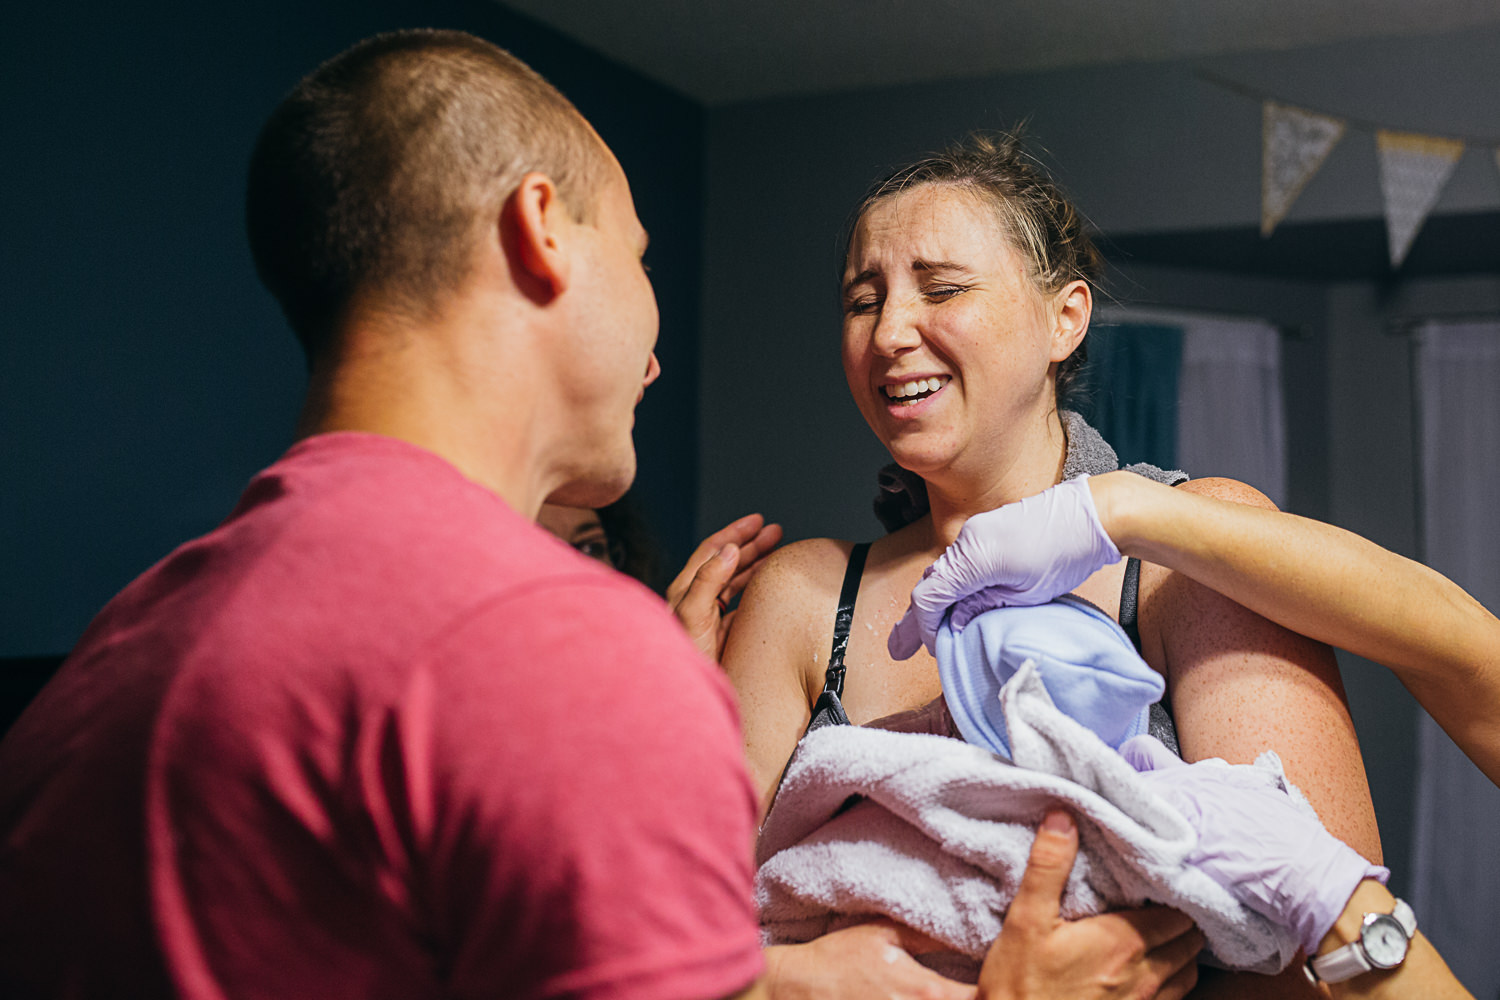 woman who just delivered baby at home looks relieved as her husband stands facing her